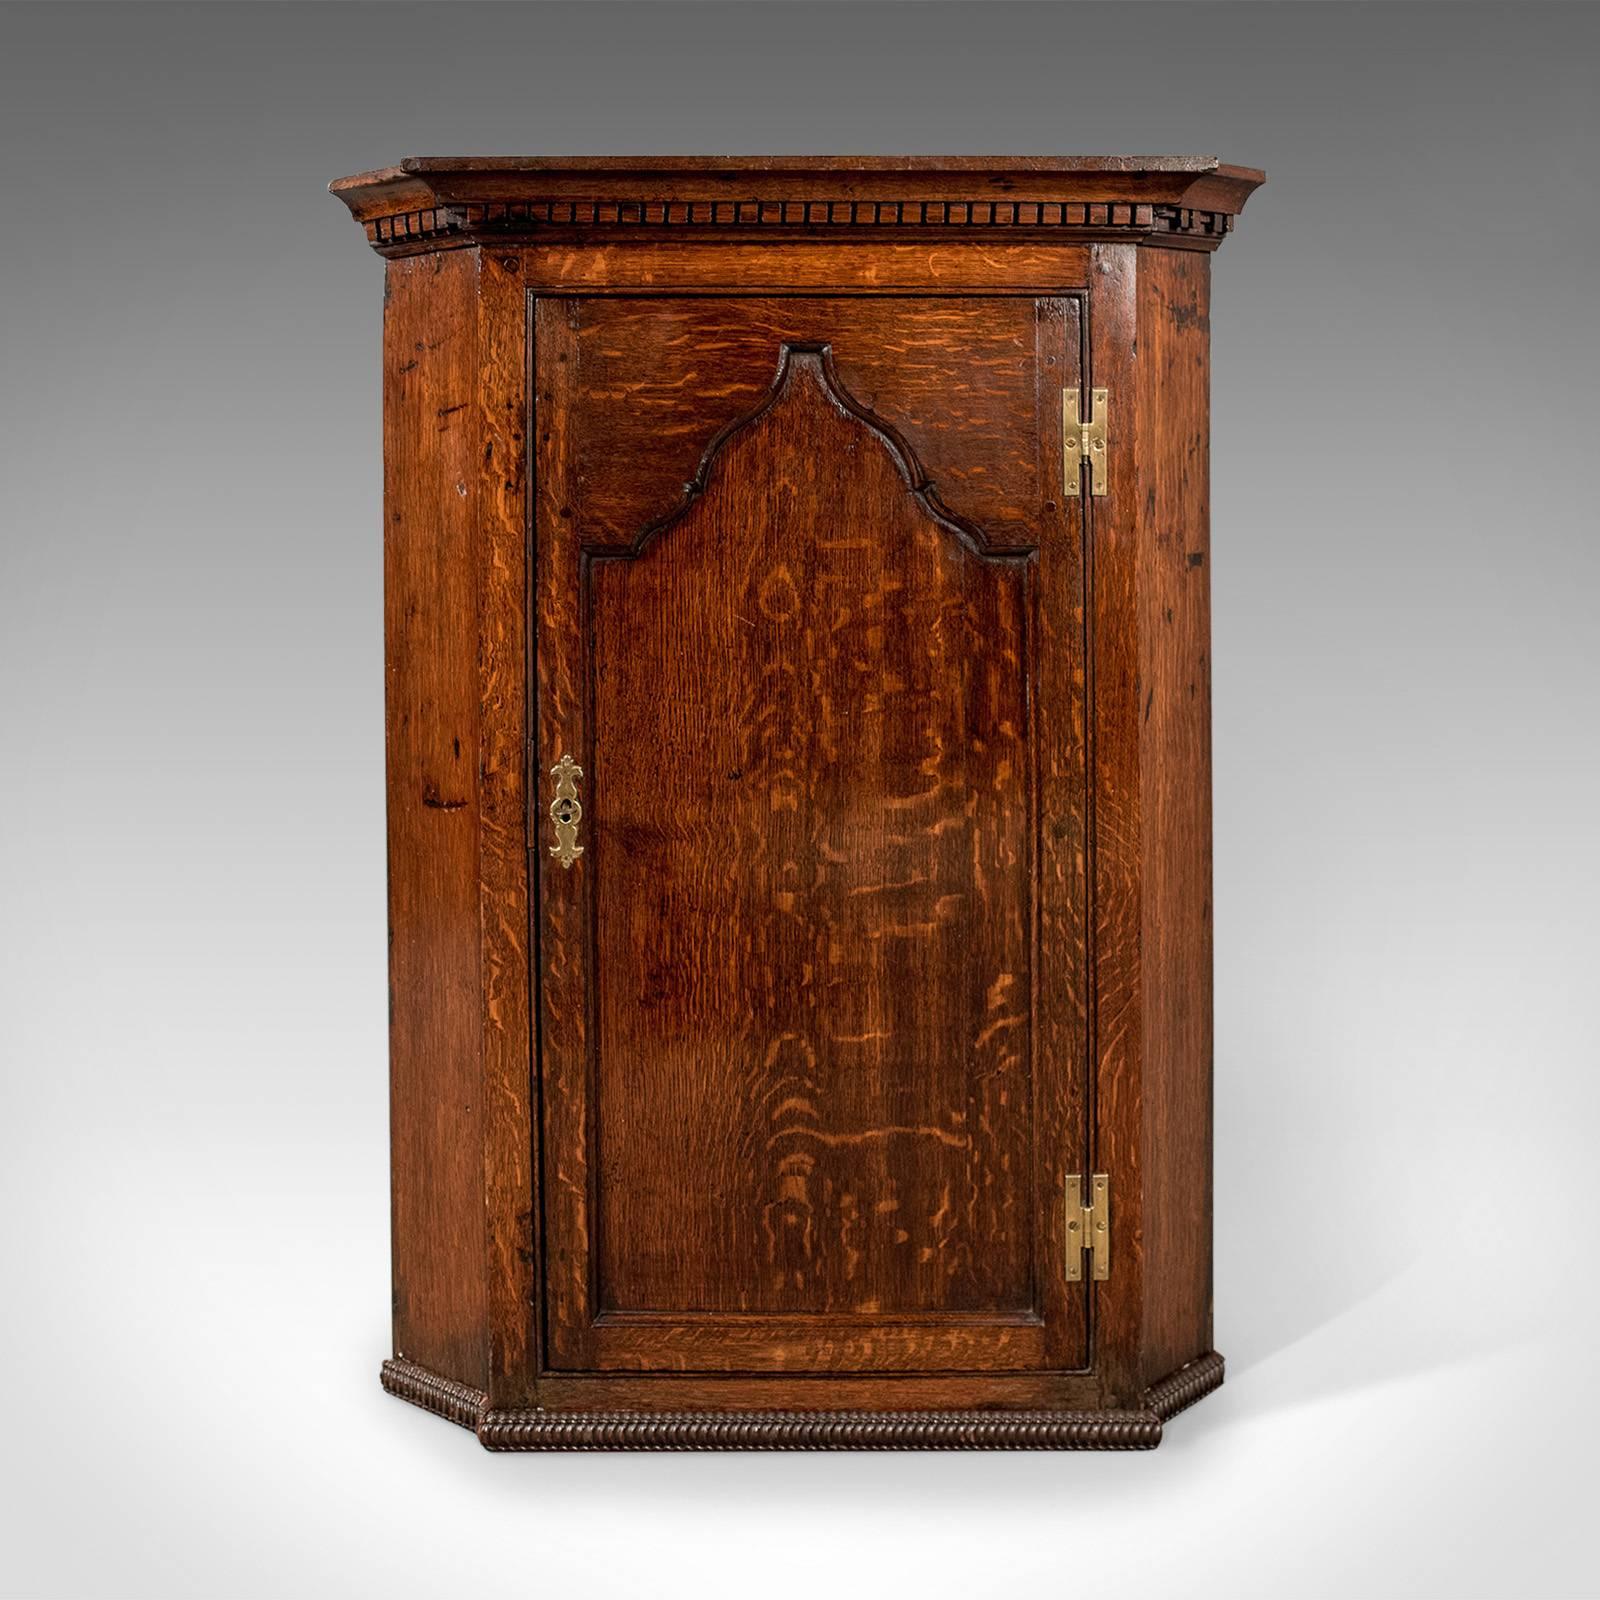 This is an antique corner cabinet, an English oak, late Georgian hanging cupboard dating to circa 1780.

Attractive deep tones to the oak with fine, consistent color
Attractive wisps of medullary rays prominent through the wax polished